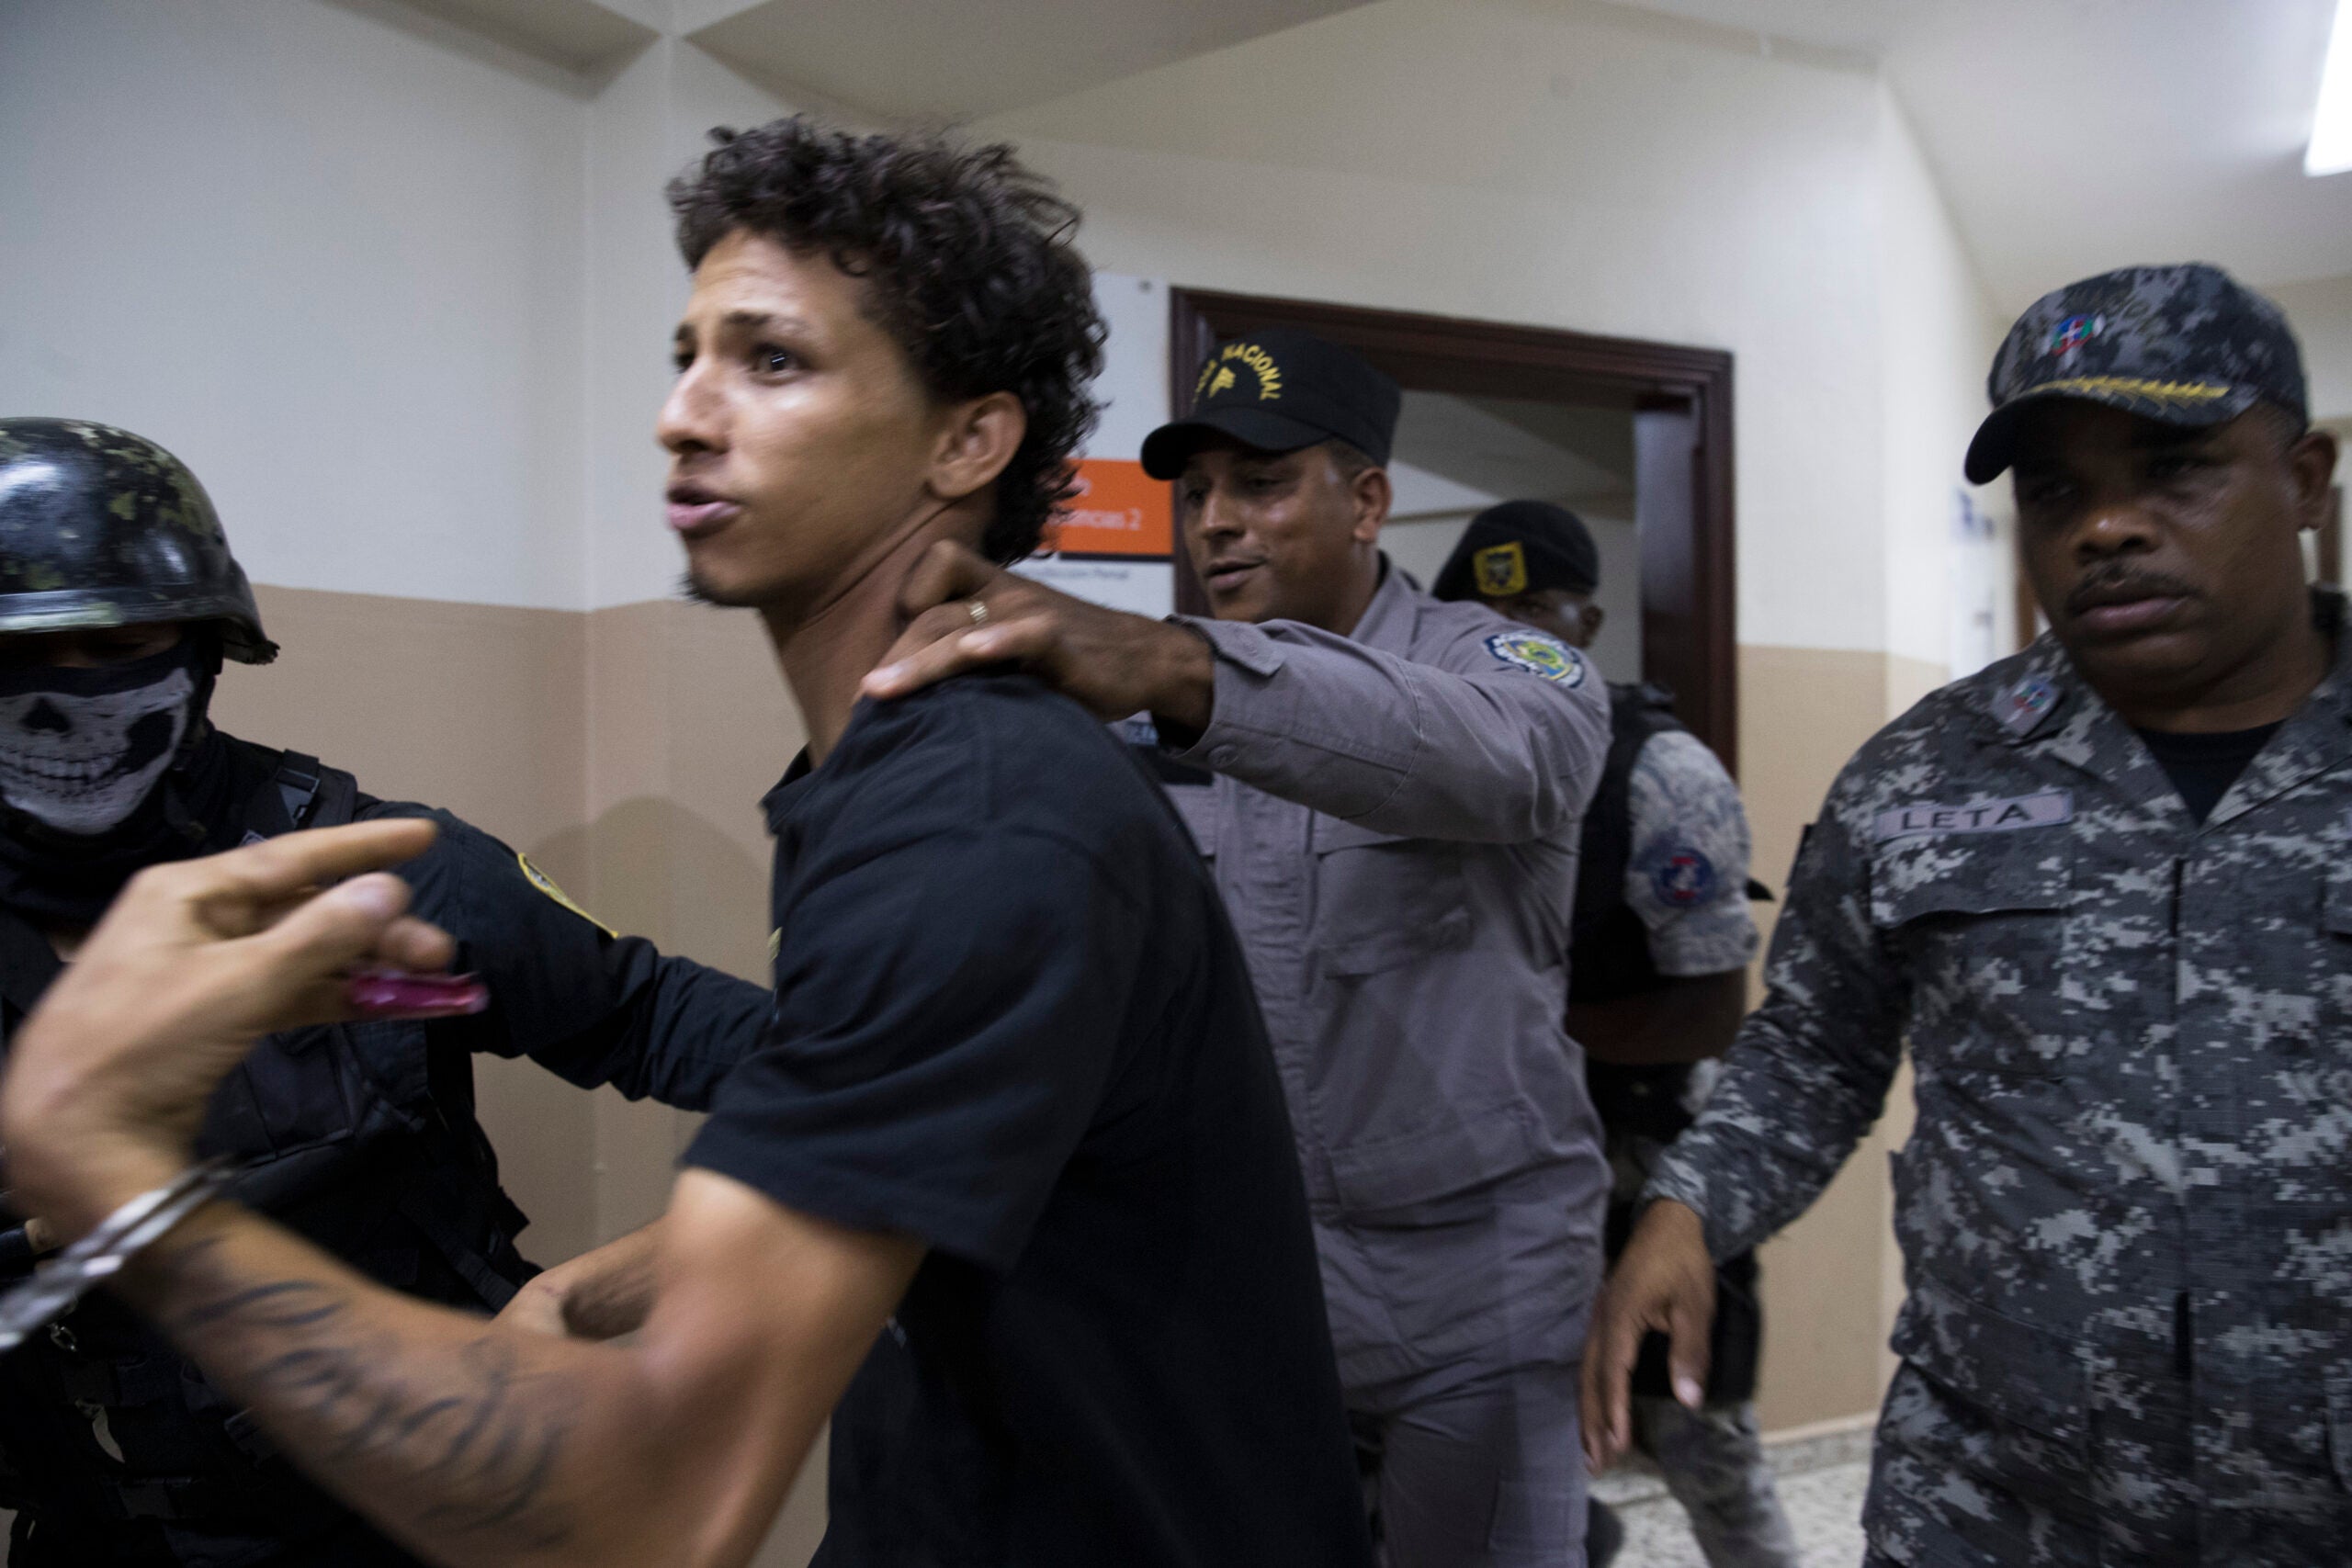 Rolfi Ferreyra Cruz, the alleged shooter, is taken to court by the police in Santo Domingo, Dominican Republic, in June 2019.